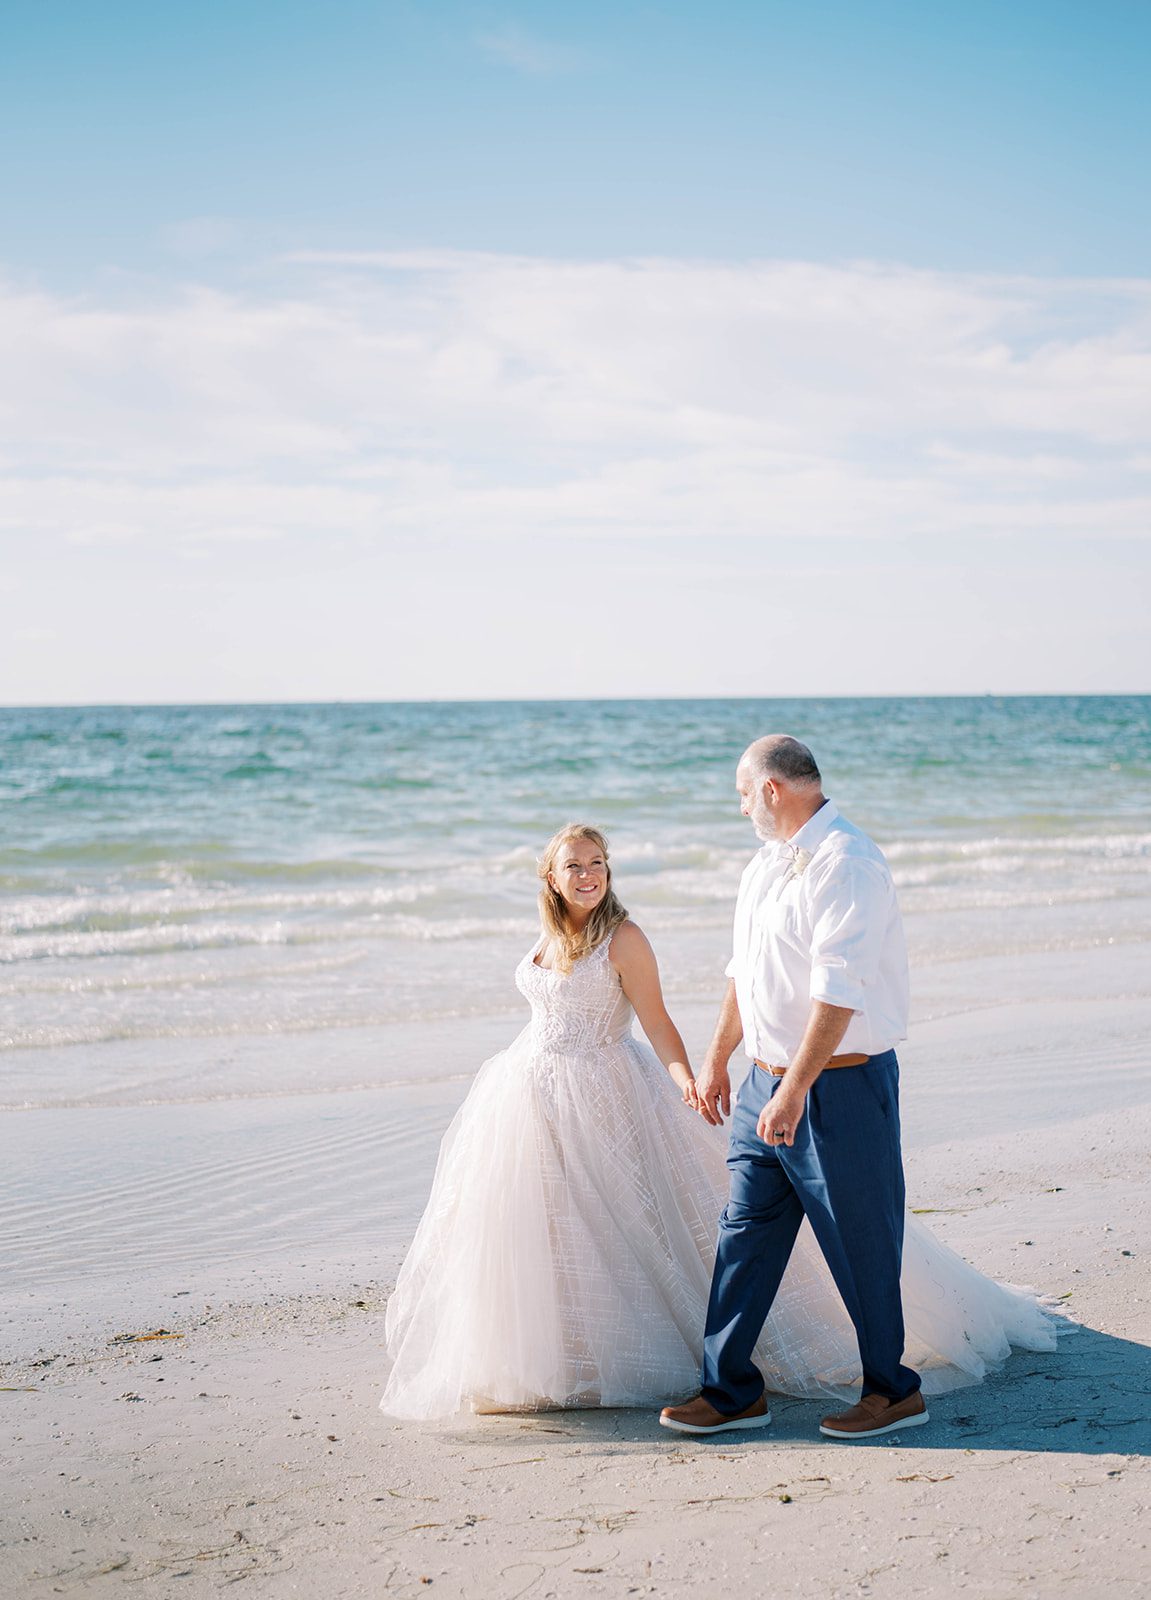 luxury destination beach wedding in Florida with bride and groom walking on the beach while holding hands on a beautiful clear day